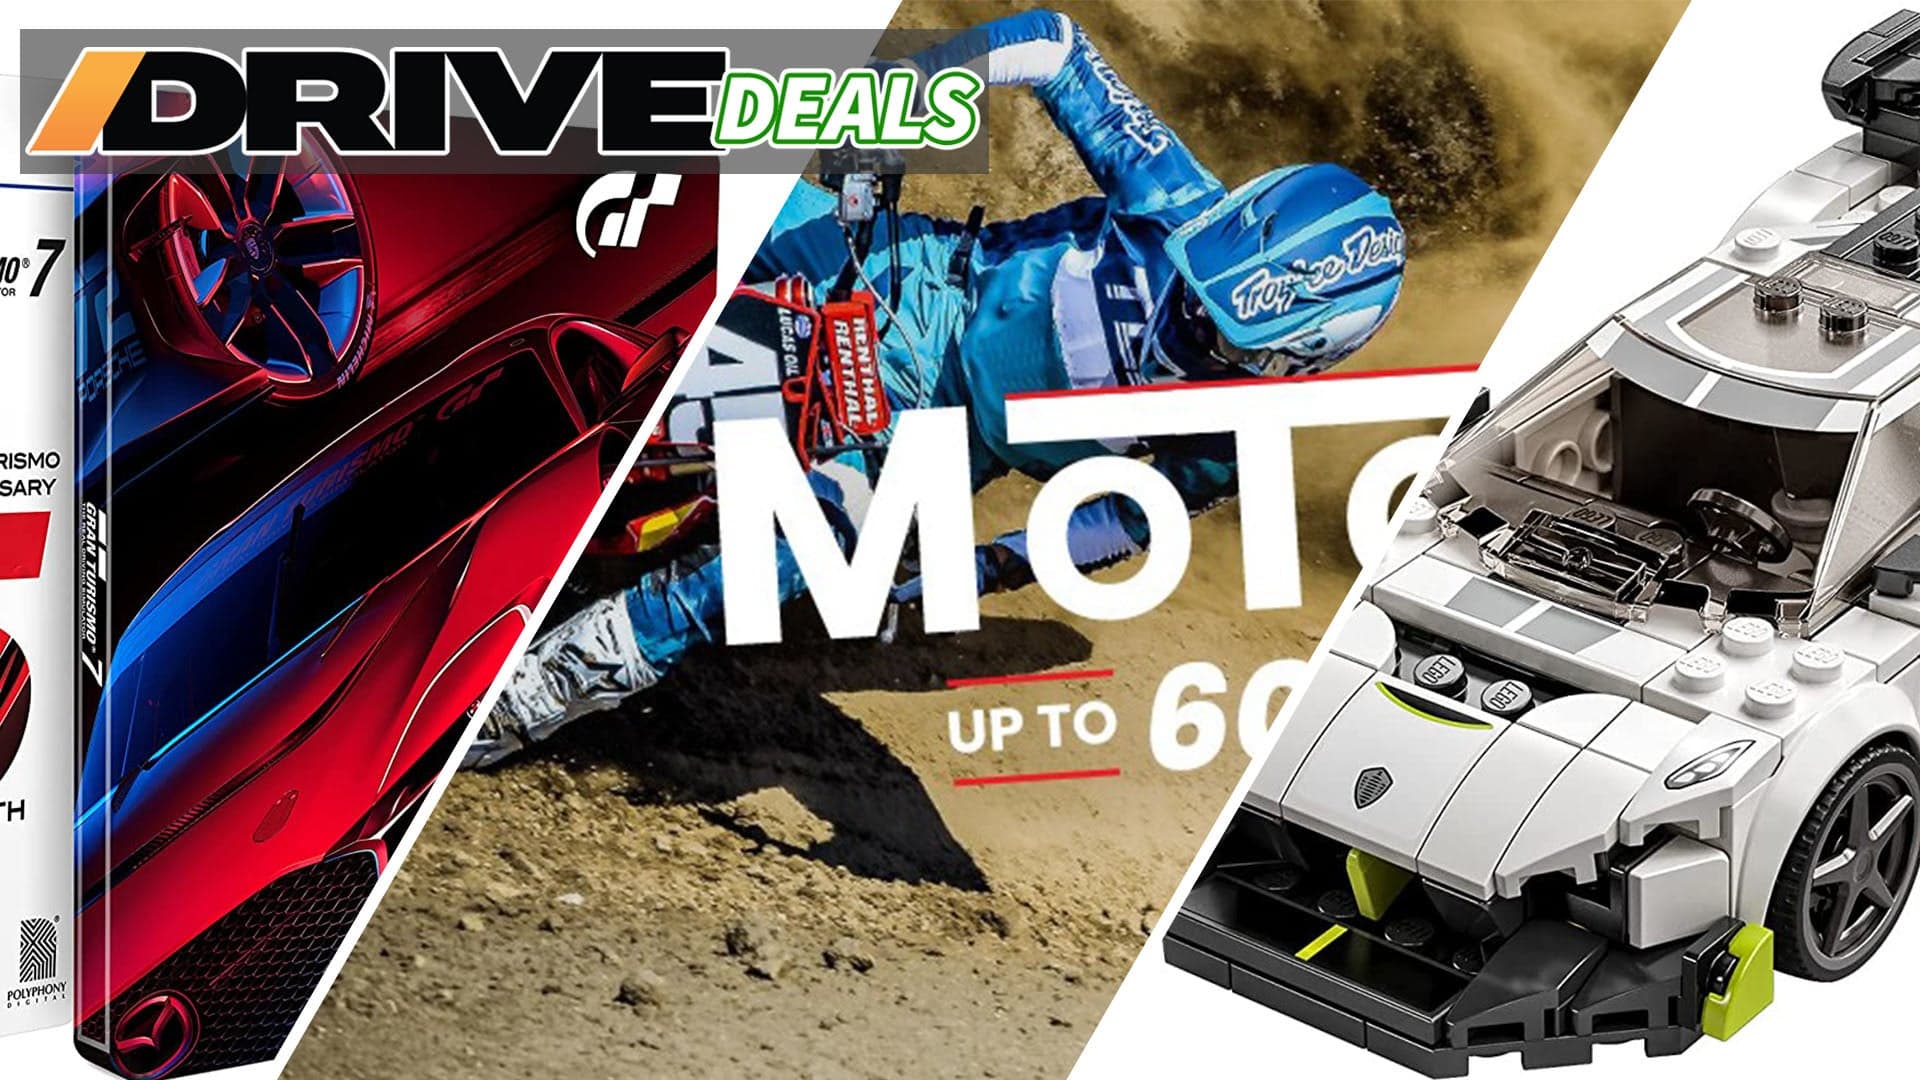 Save Big at Motosport and Ace Hardware, and Use More Deals to Stay Calm Until Spring